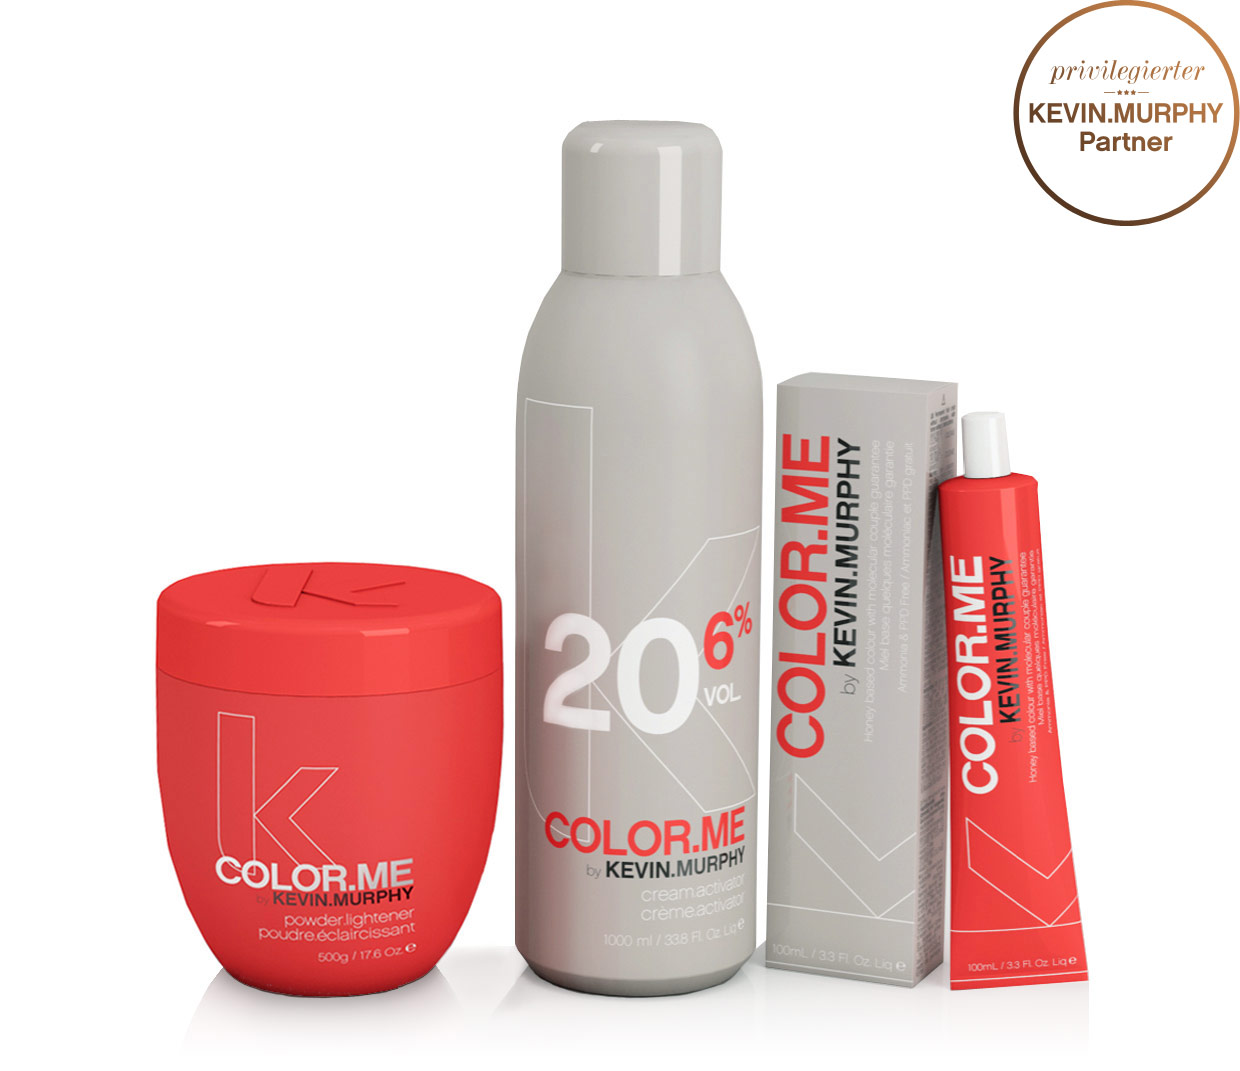 Color.Me by Kevin.Murphy